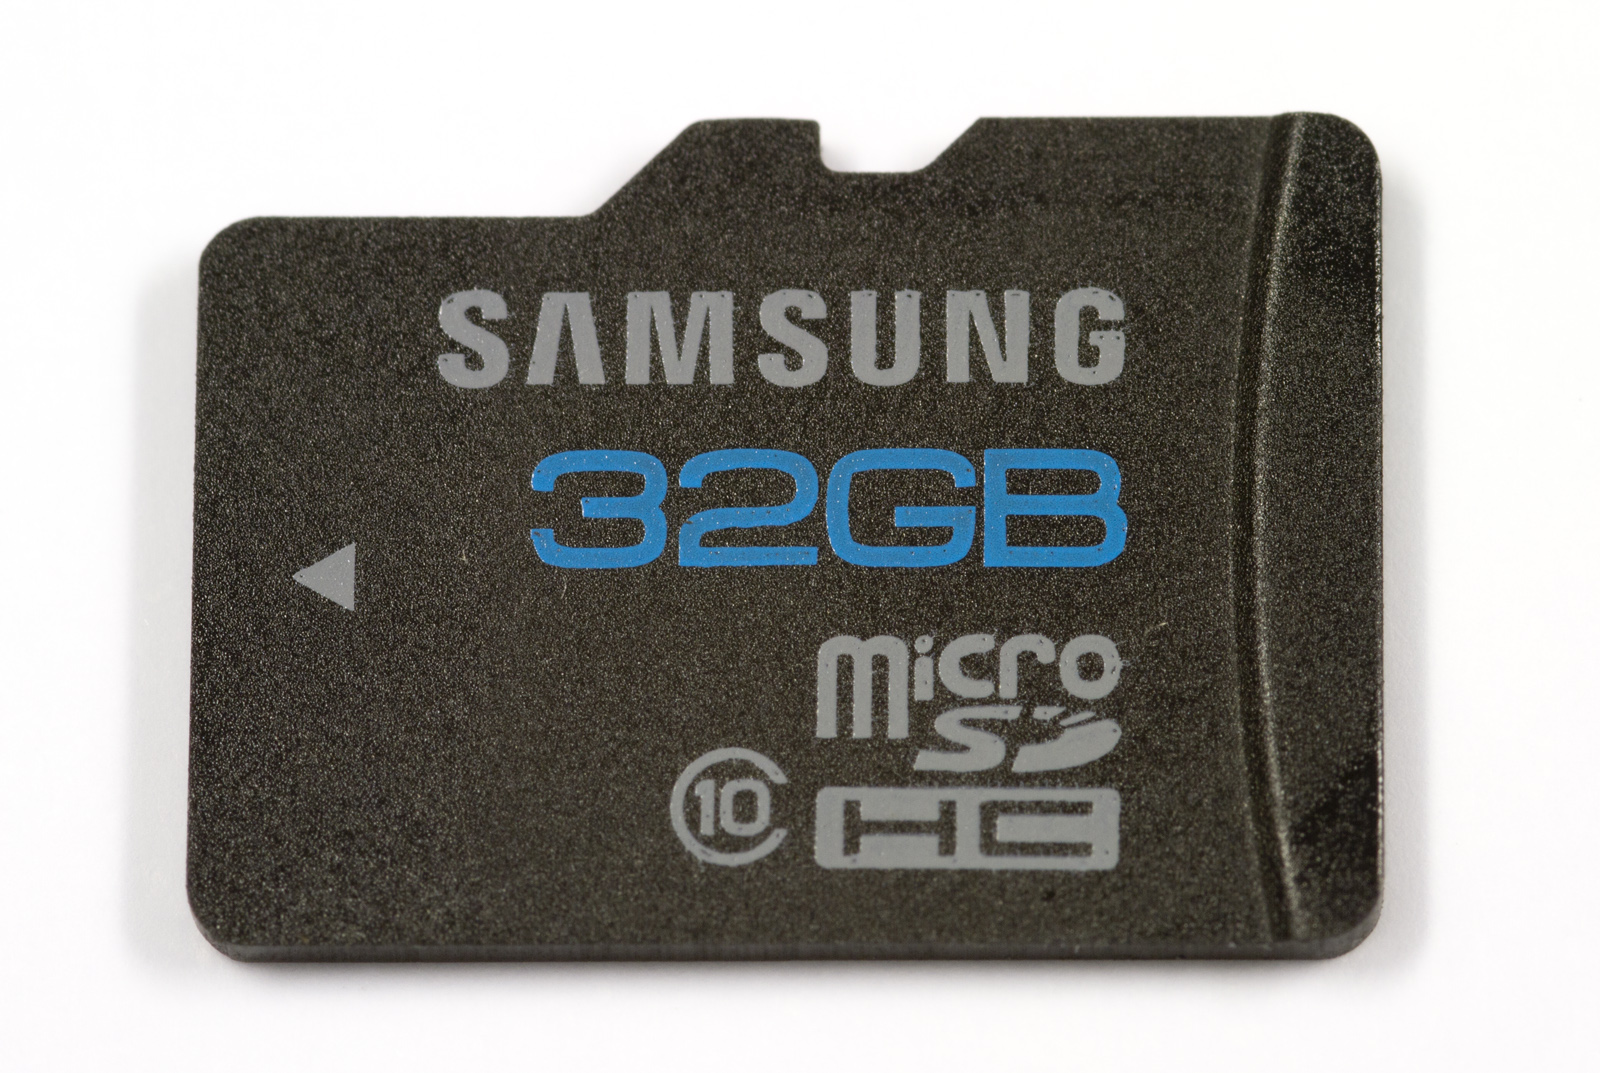 Difference between Micro SDHC and SDXC